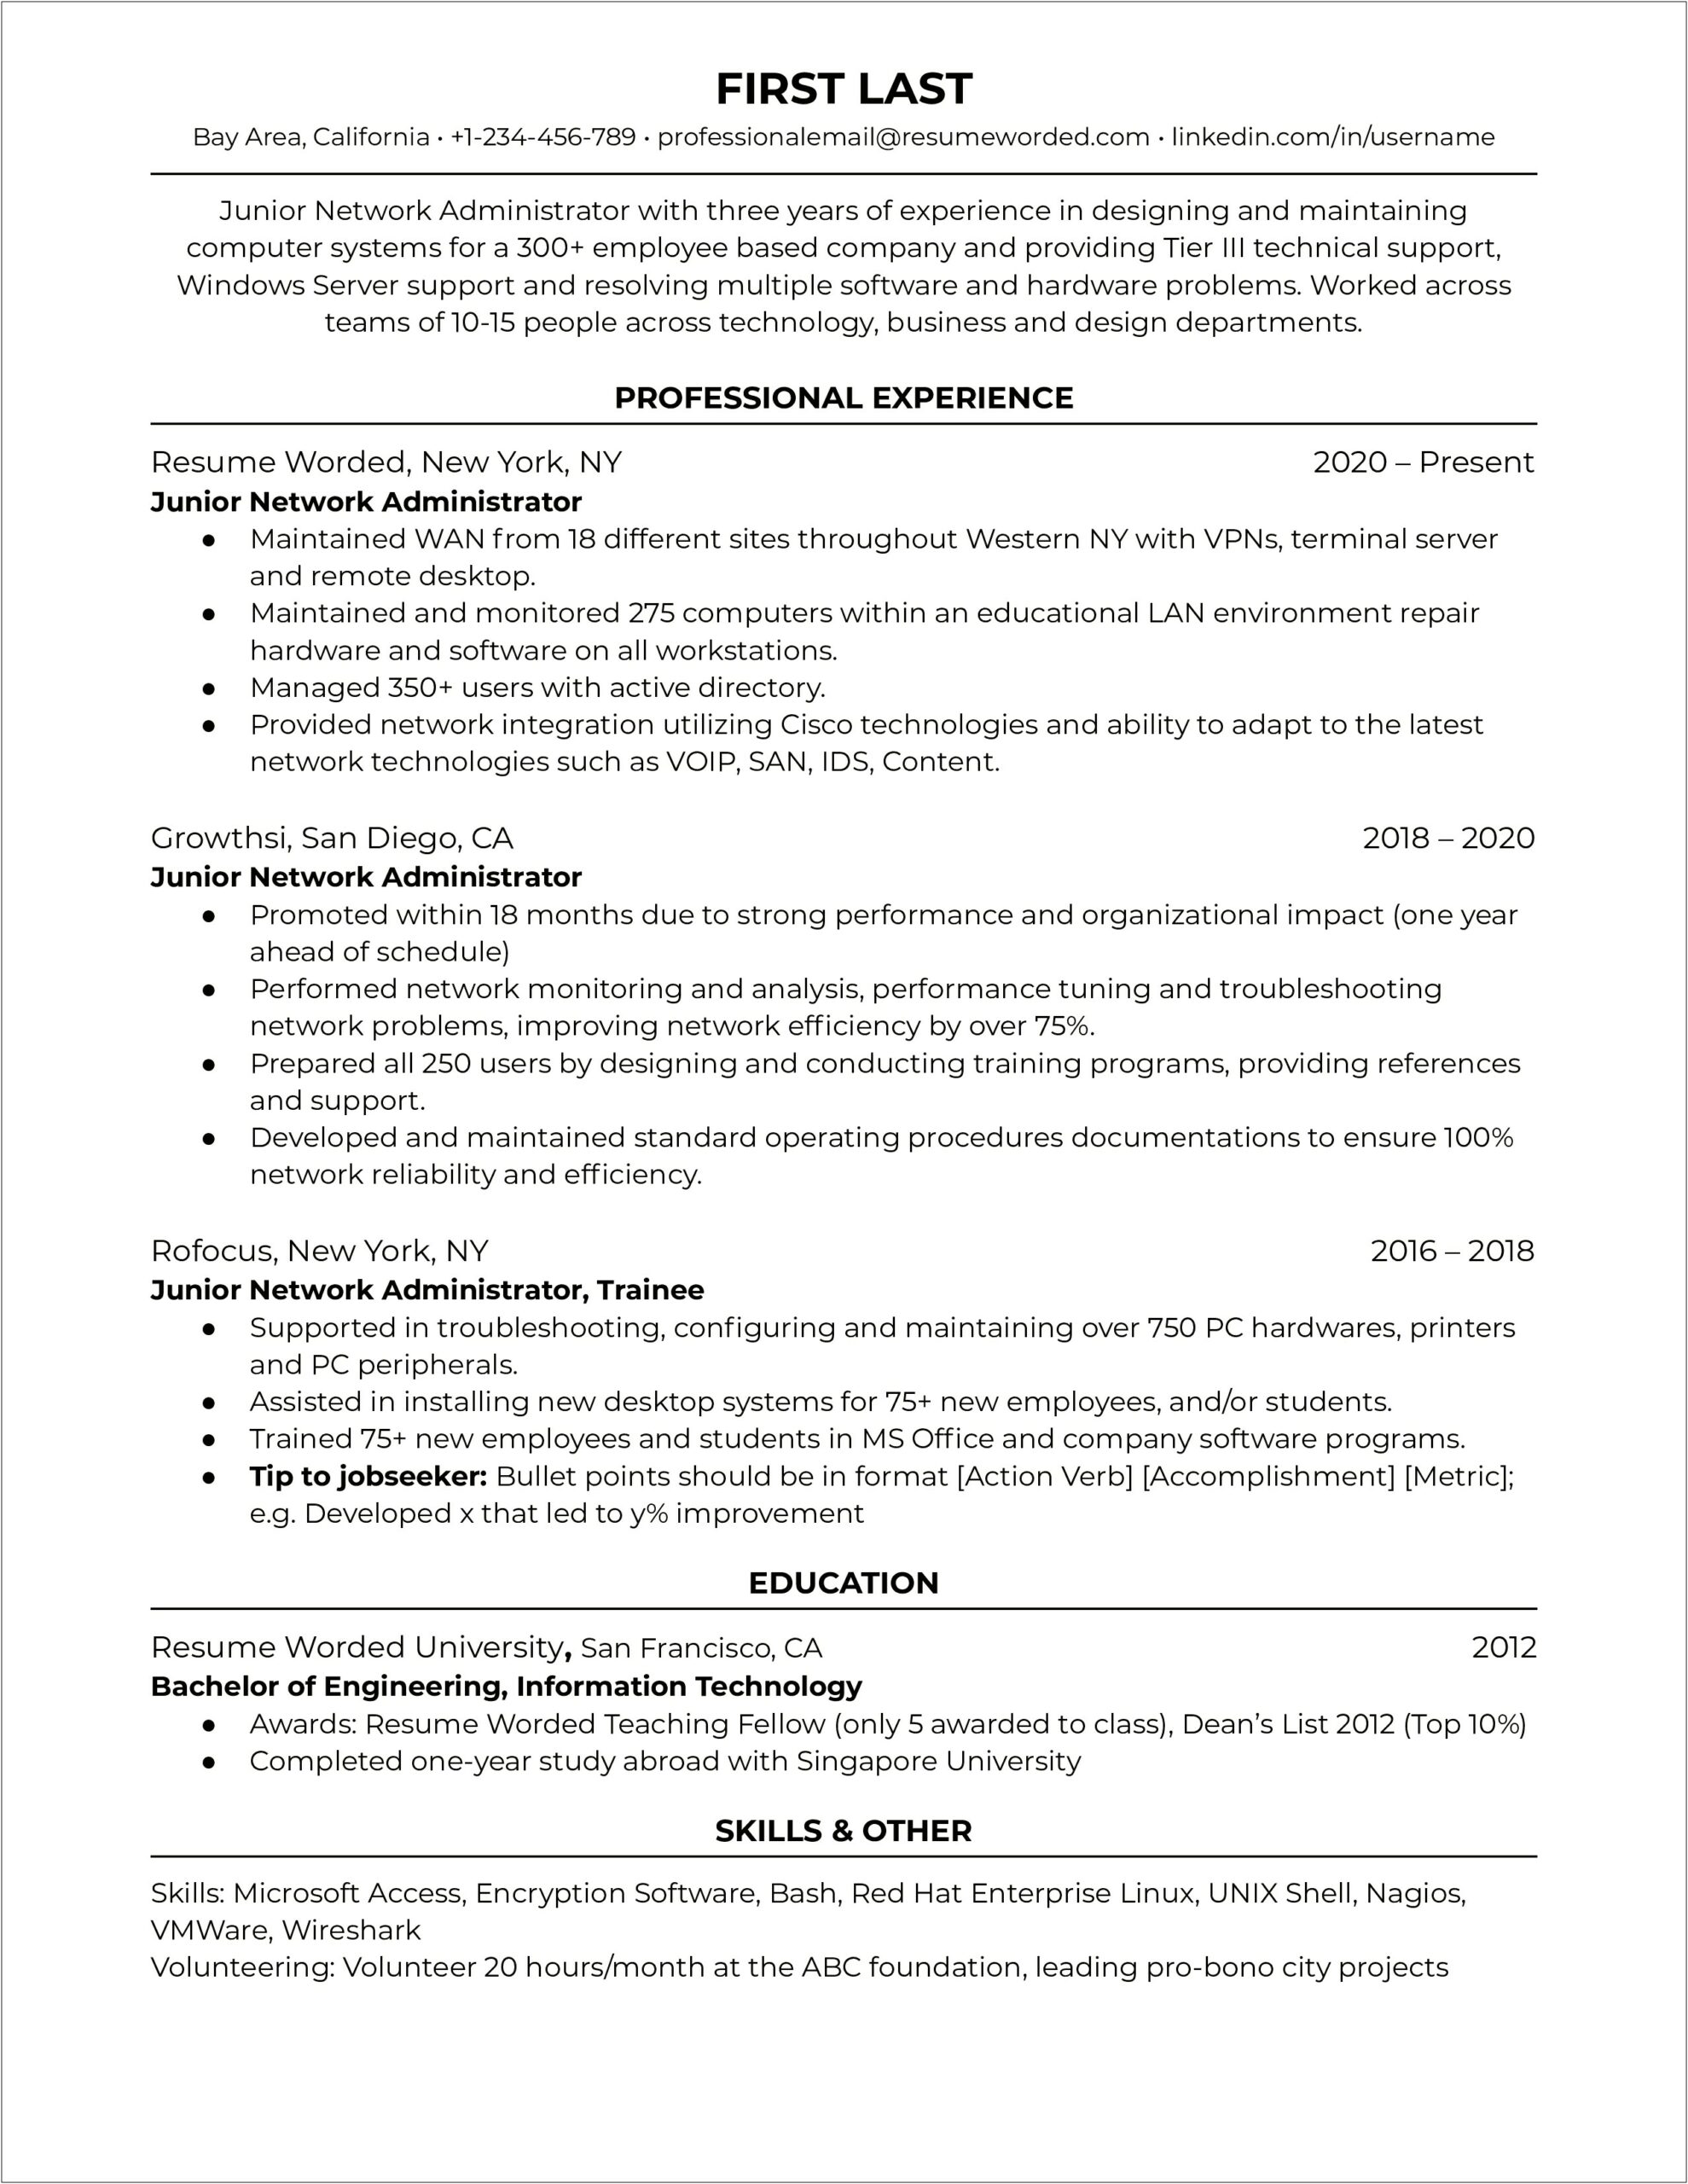 Experience Resume For Windows Server Administrator